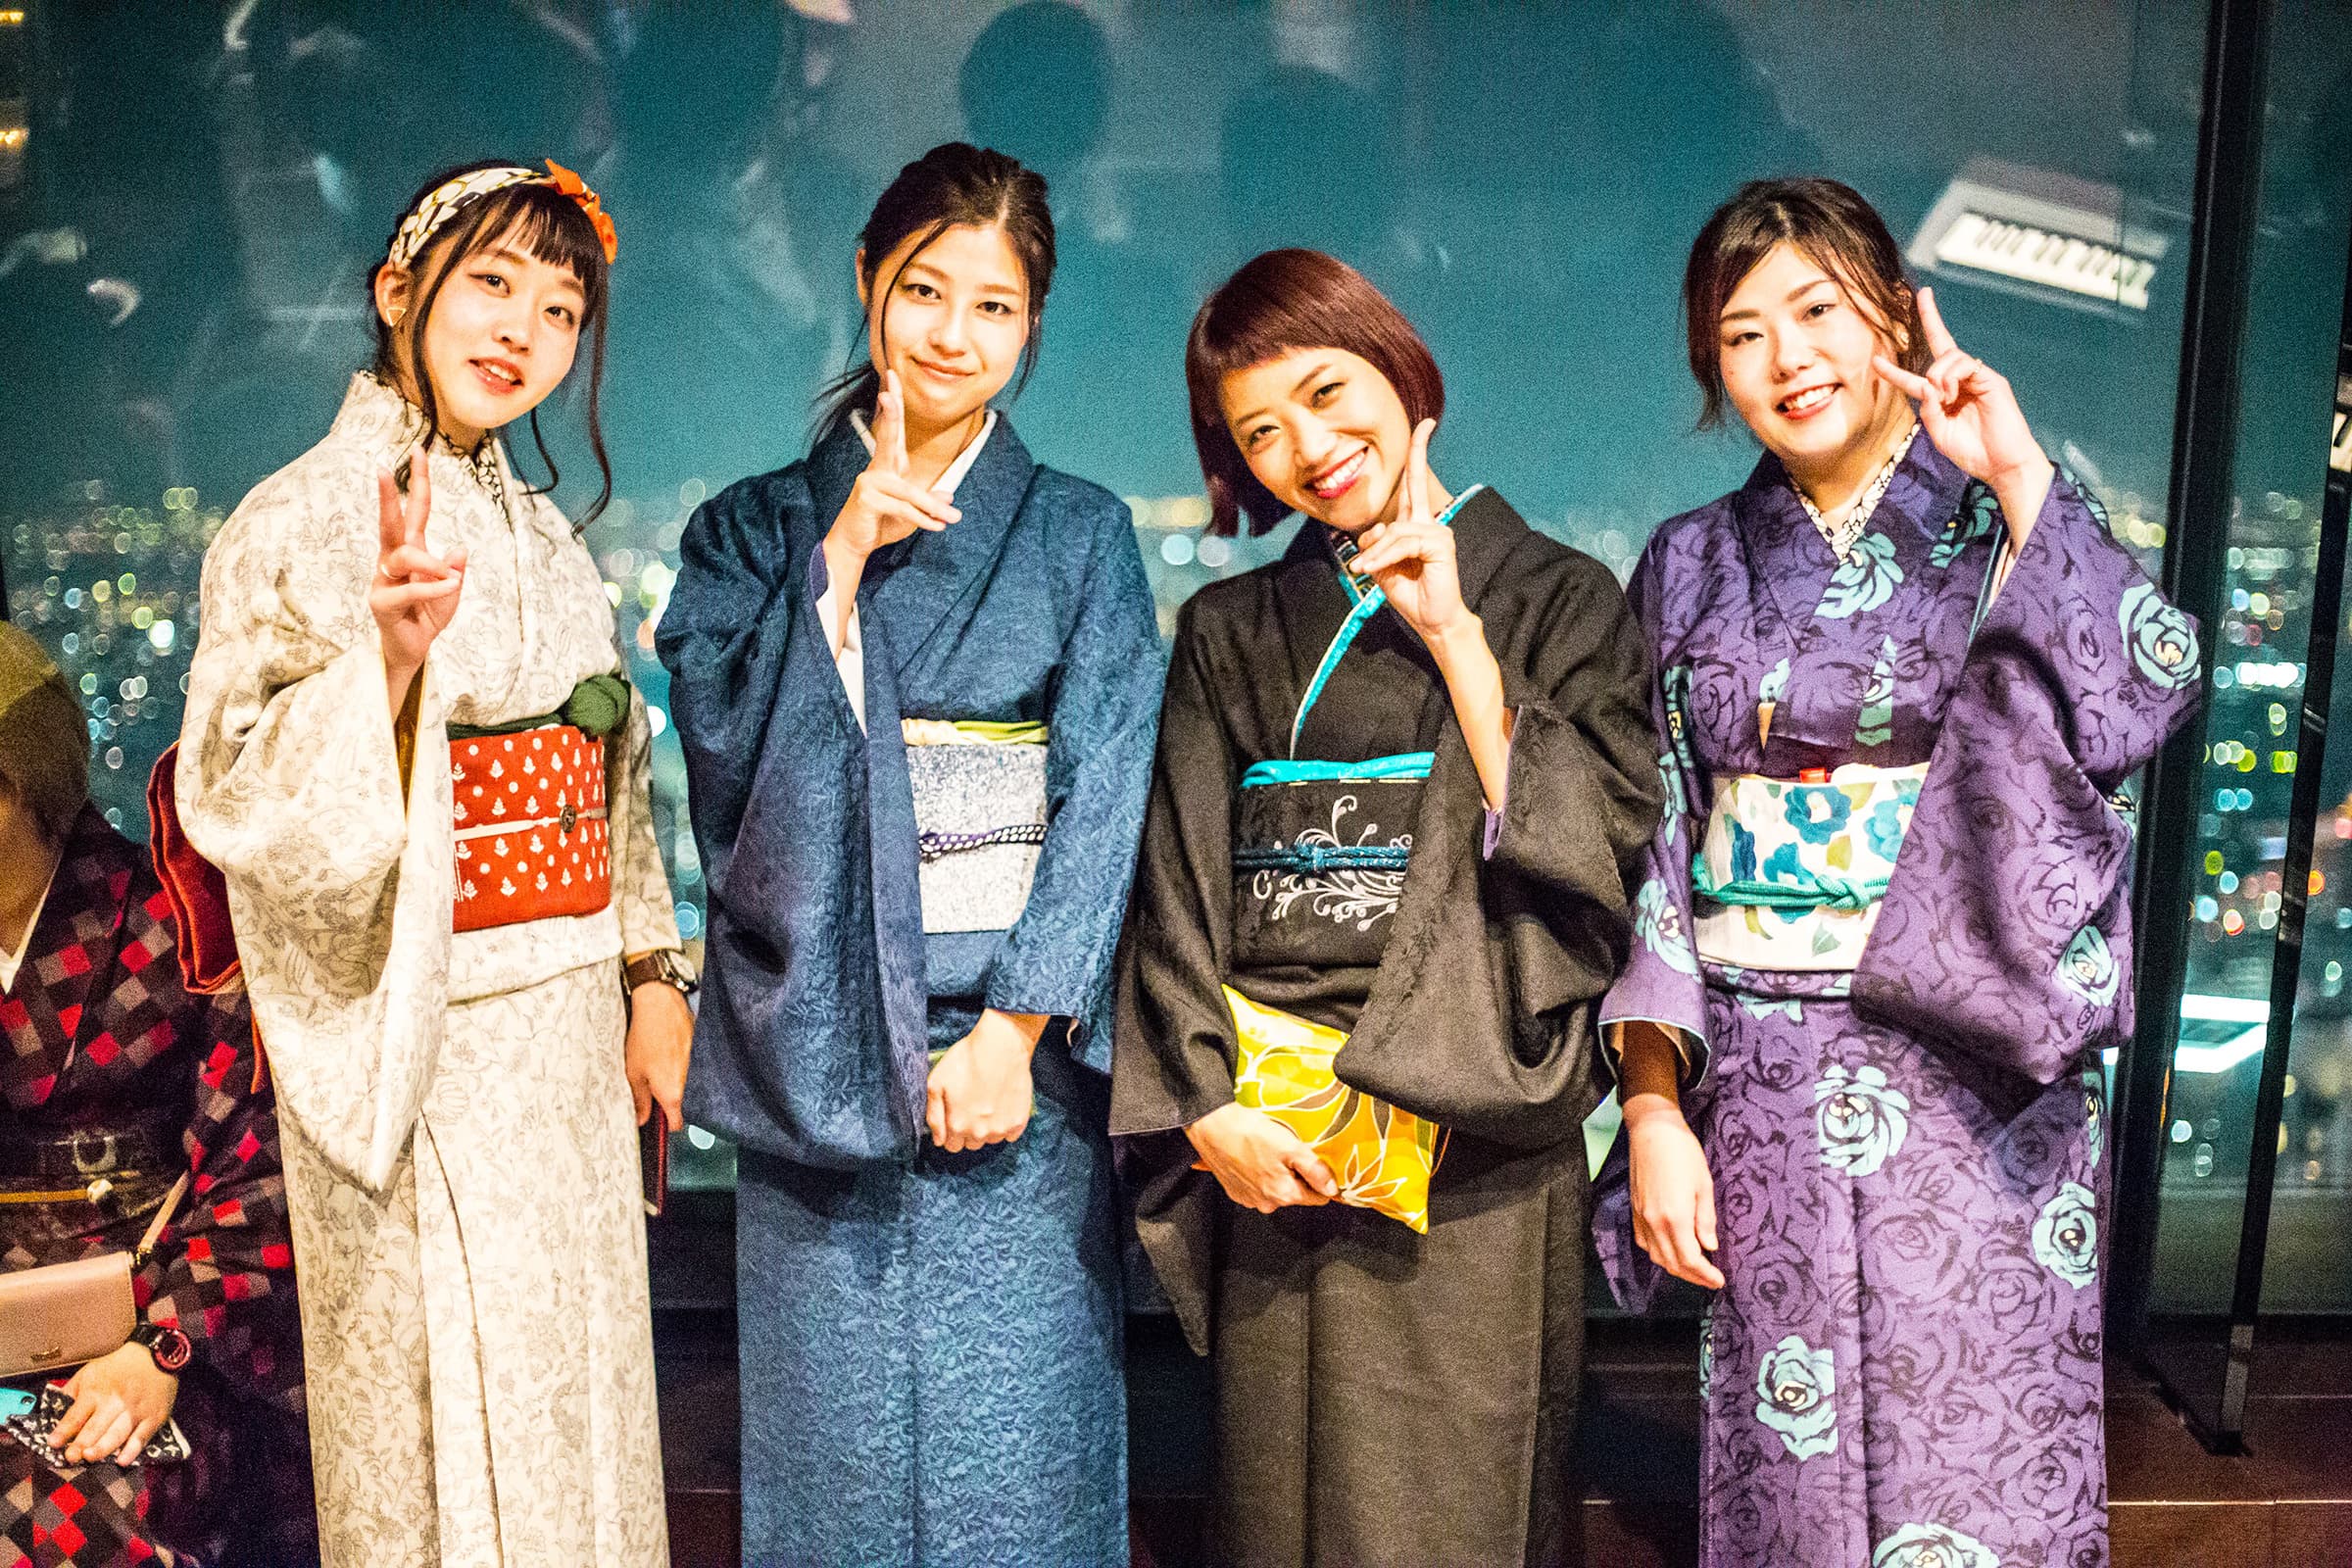 kimono party at lucent tower 2016